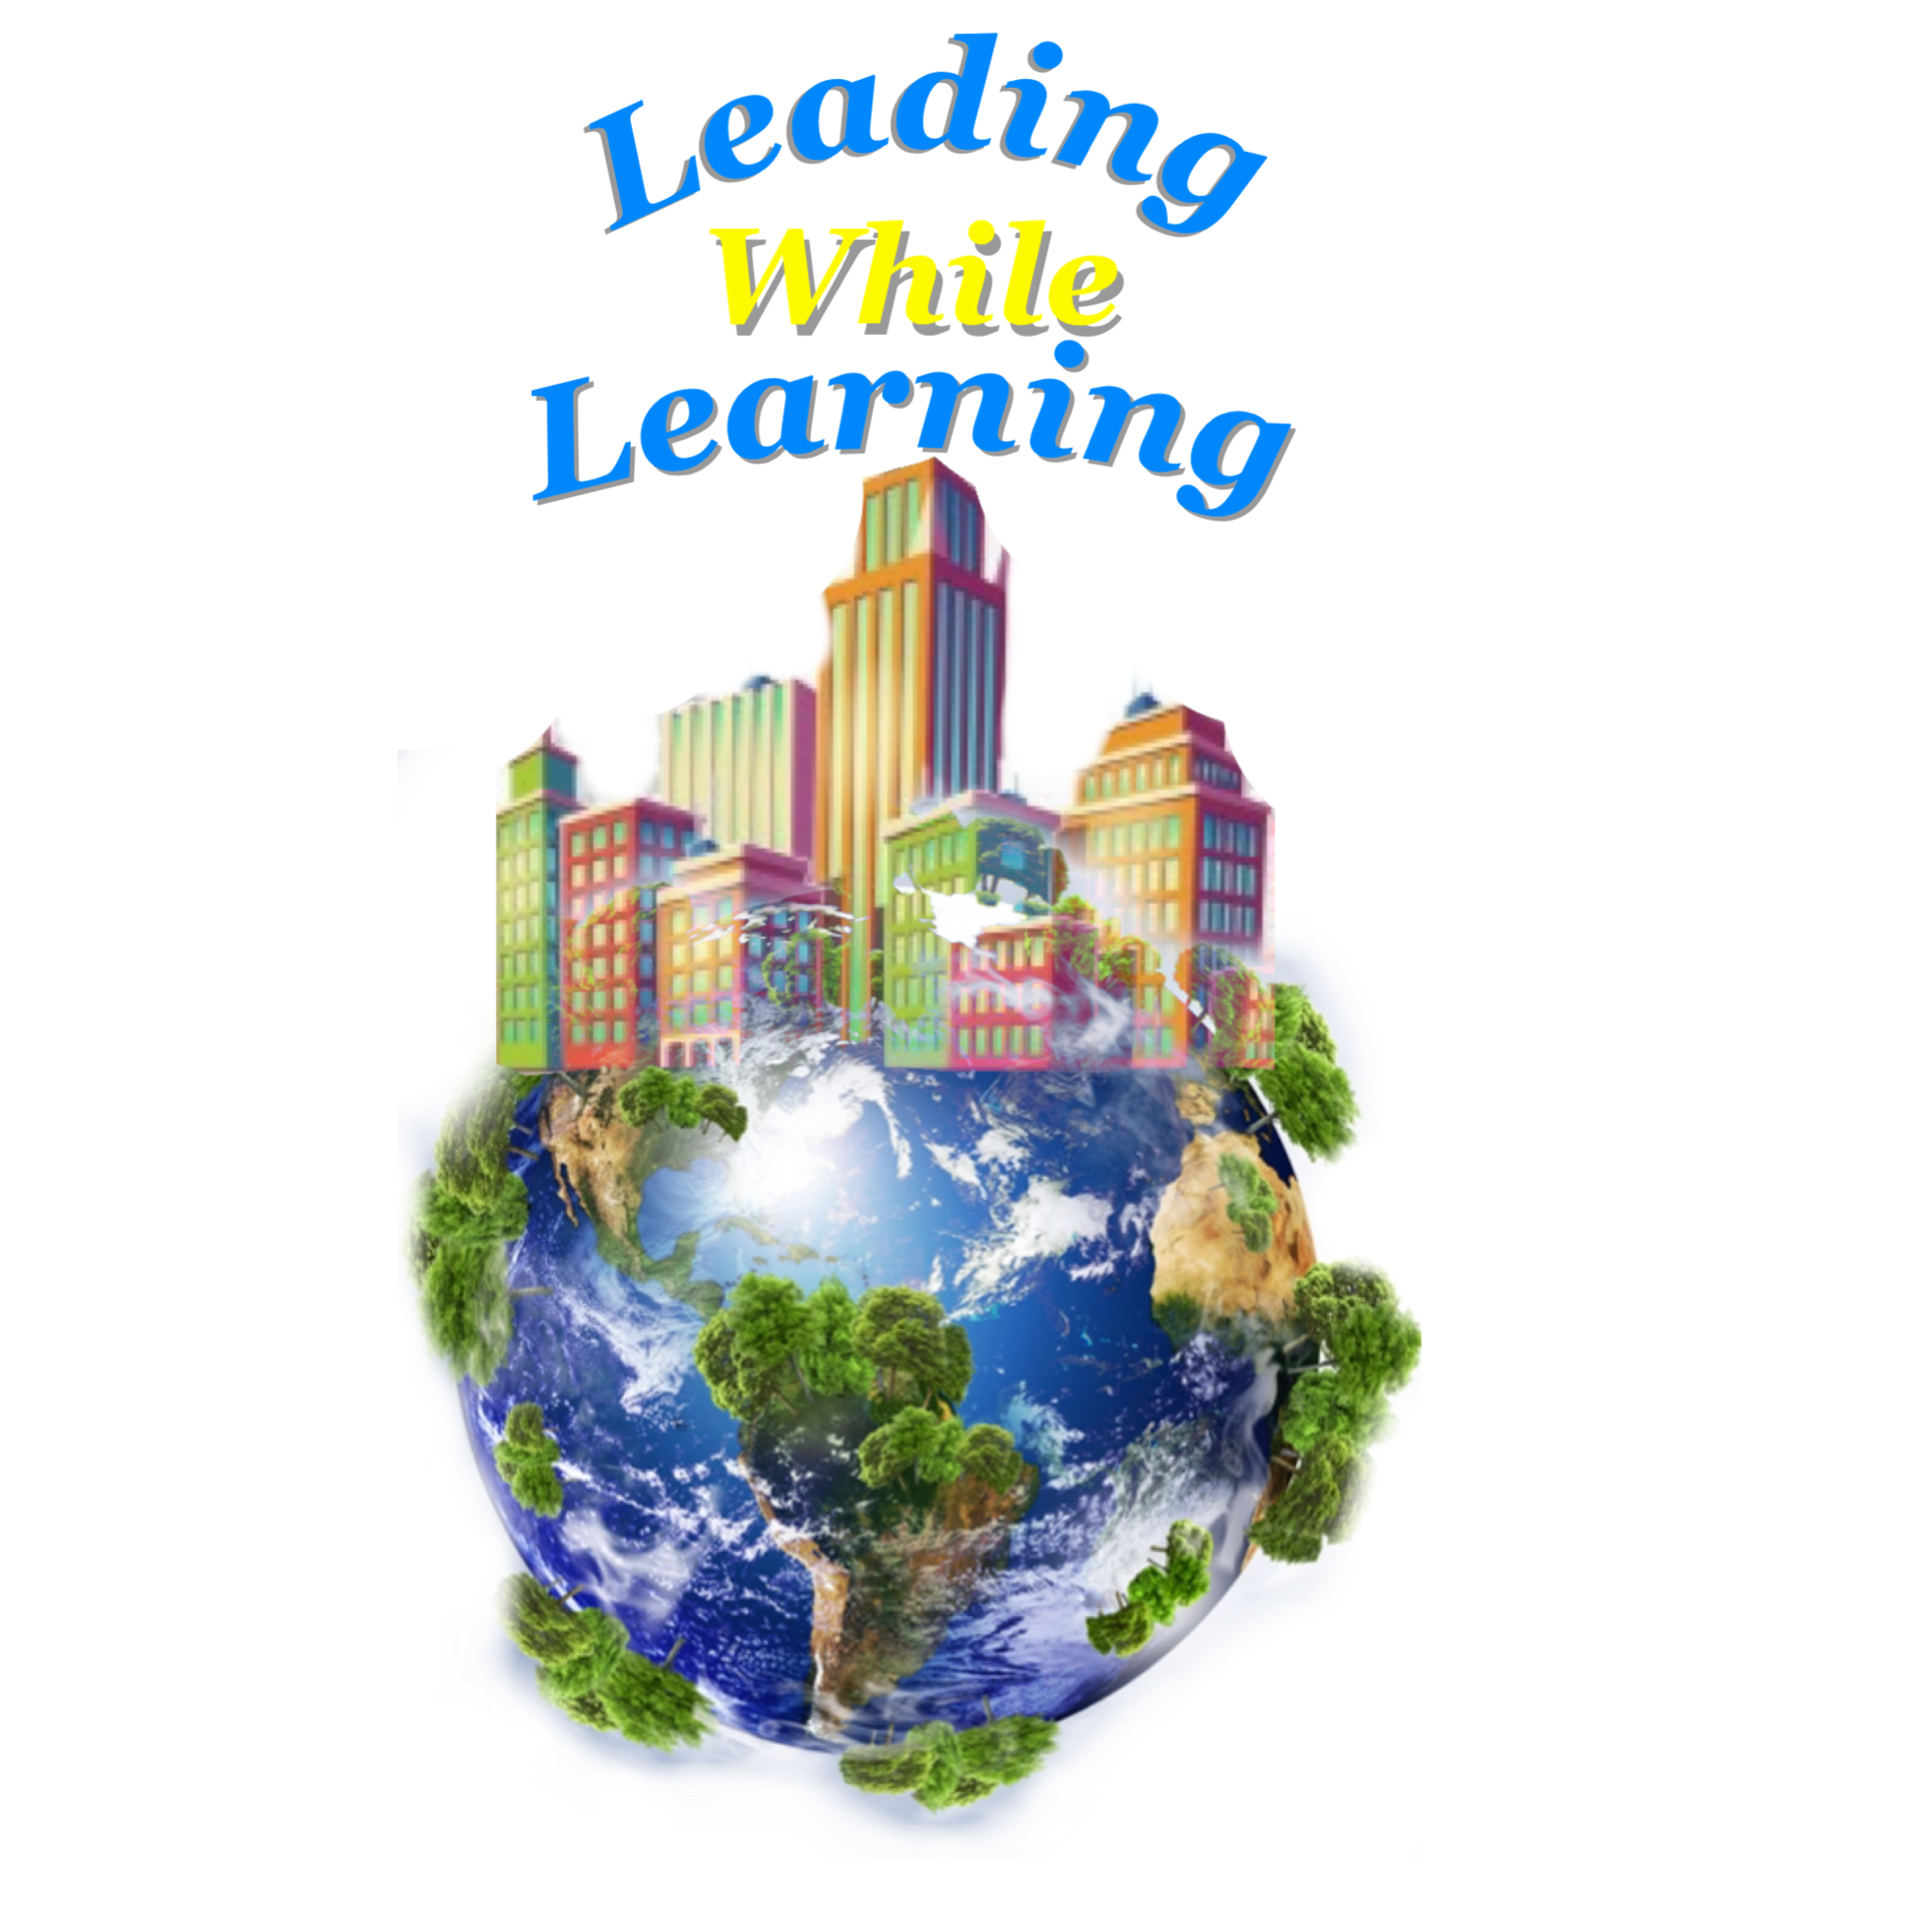 Leading While Learning